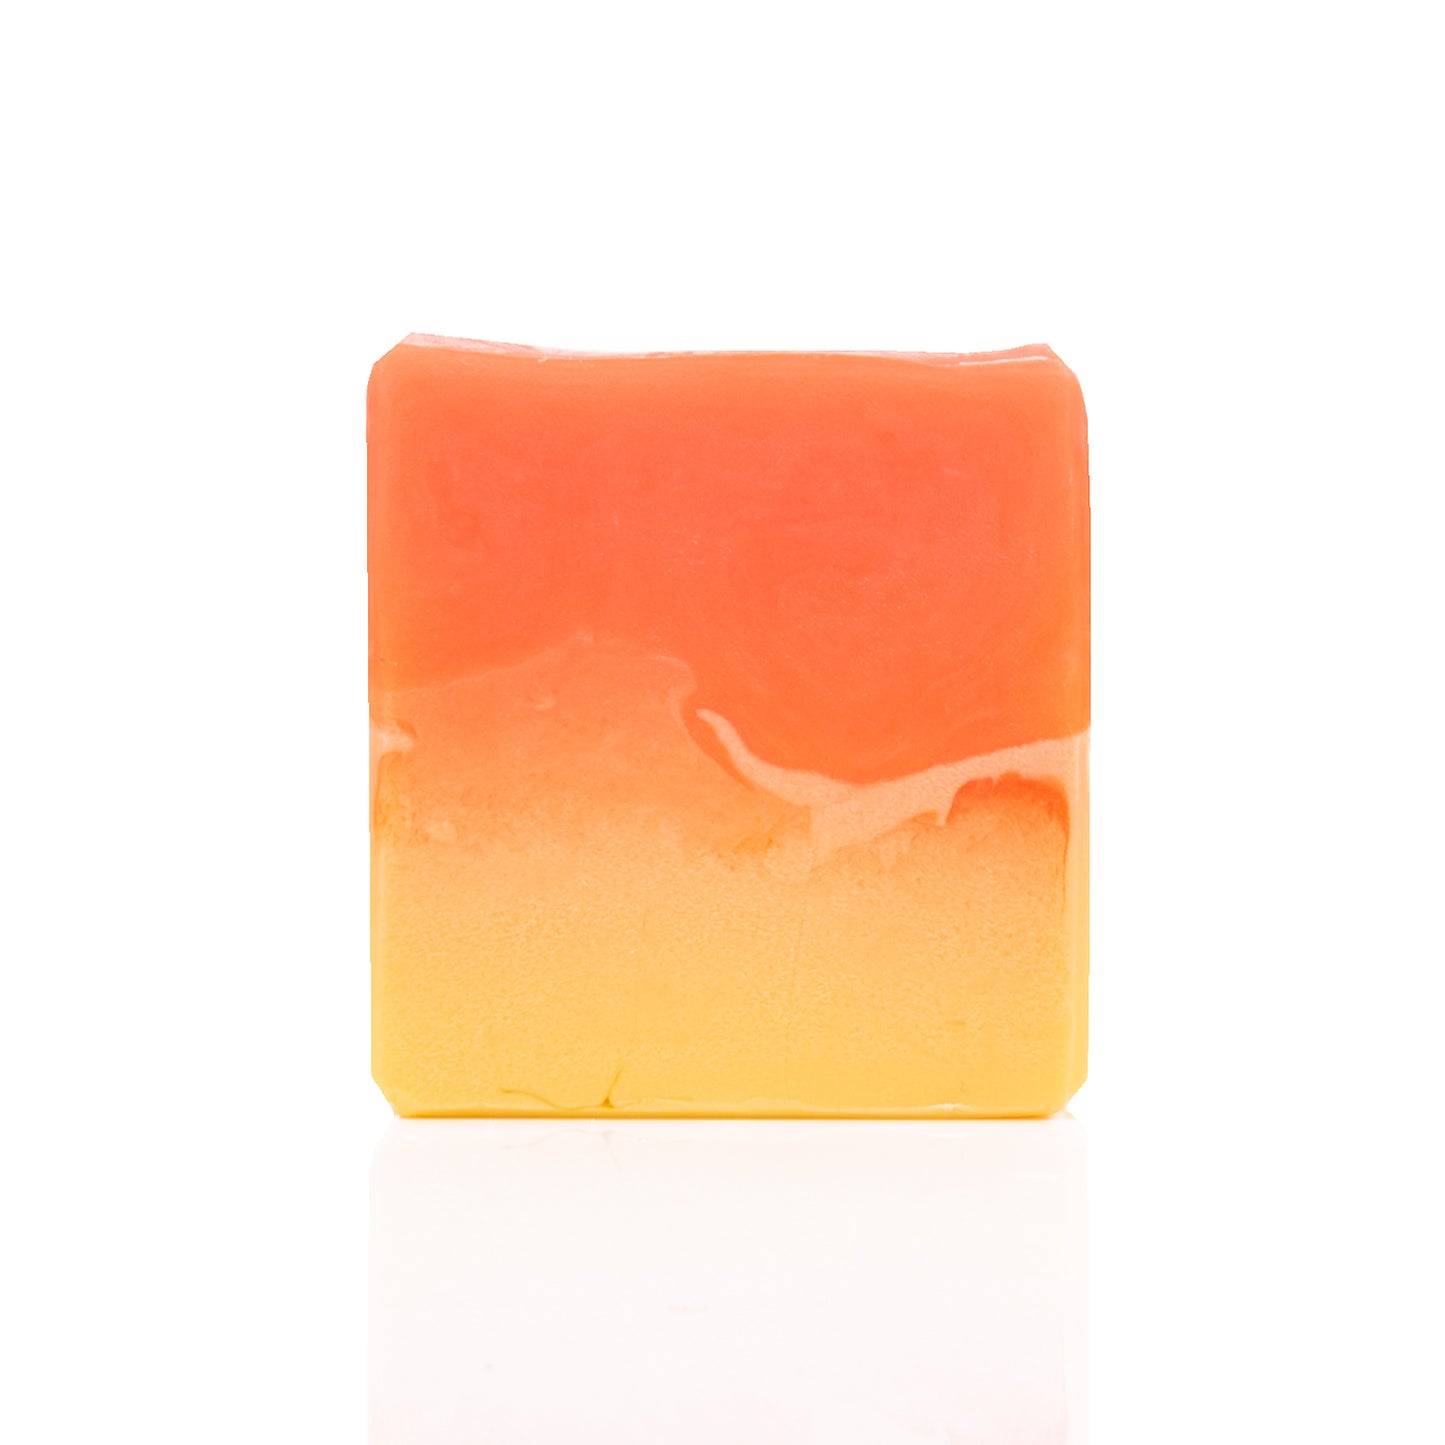 Project Scent Handmade Soap Bar 120g